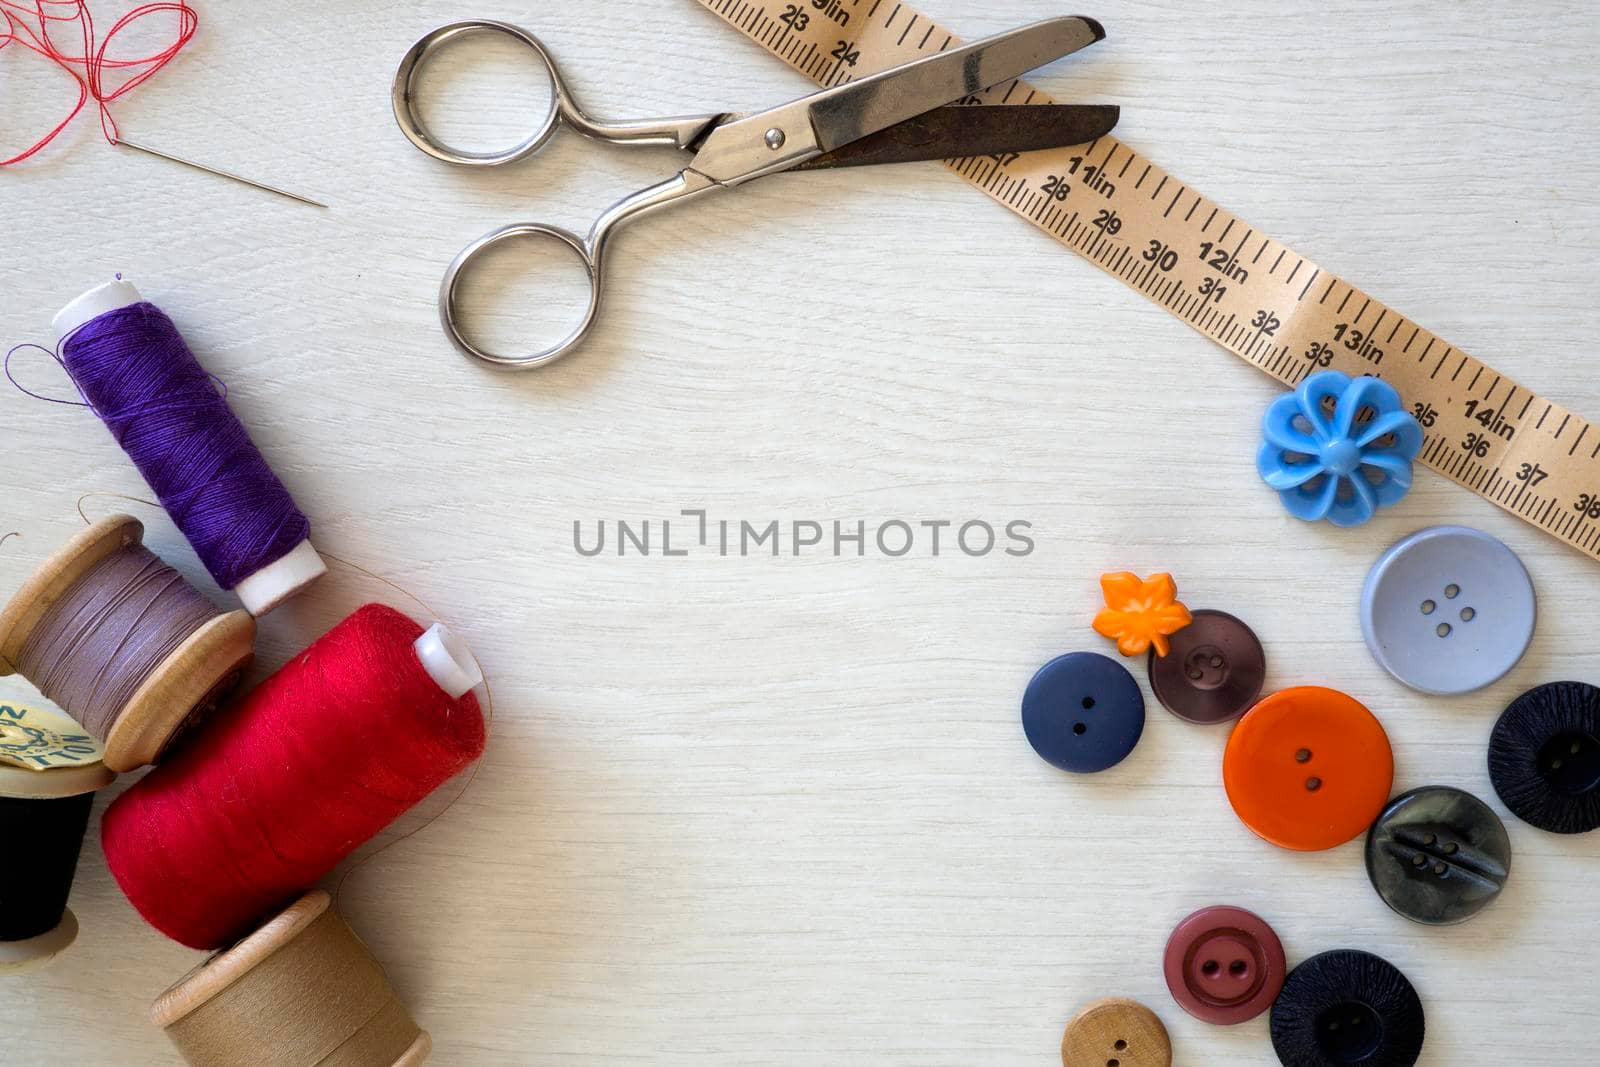 Brightly colored buttons and sewing cotton, flat lay